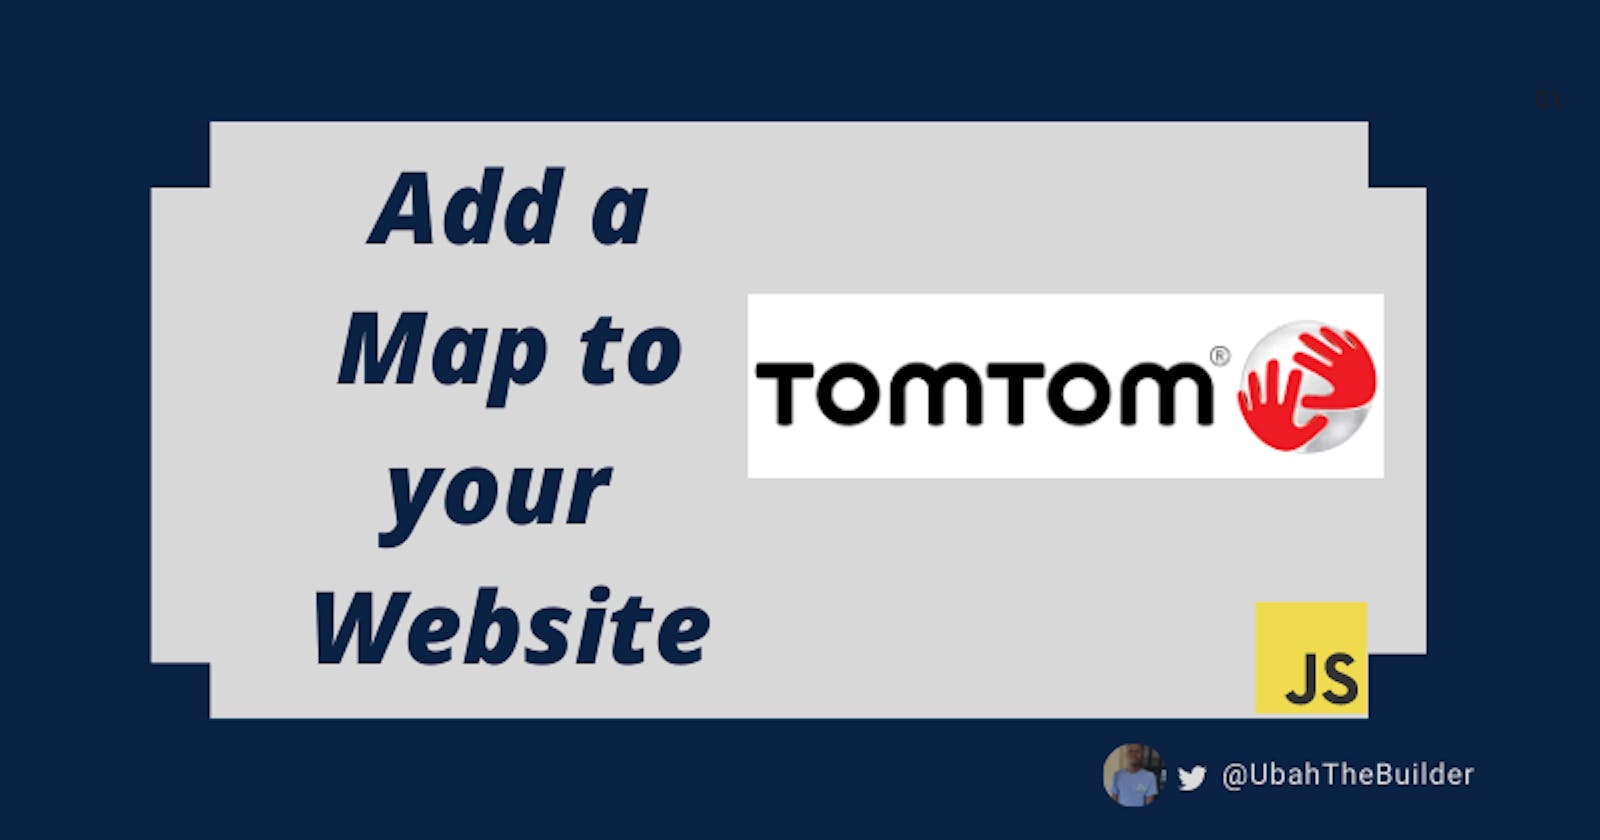 How to Easily Add a Map to Your Website in Under 10 Minutes